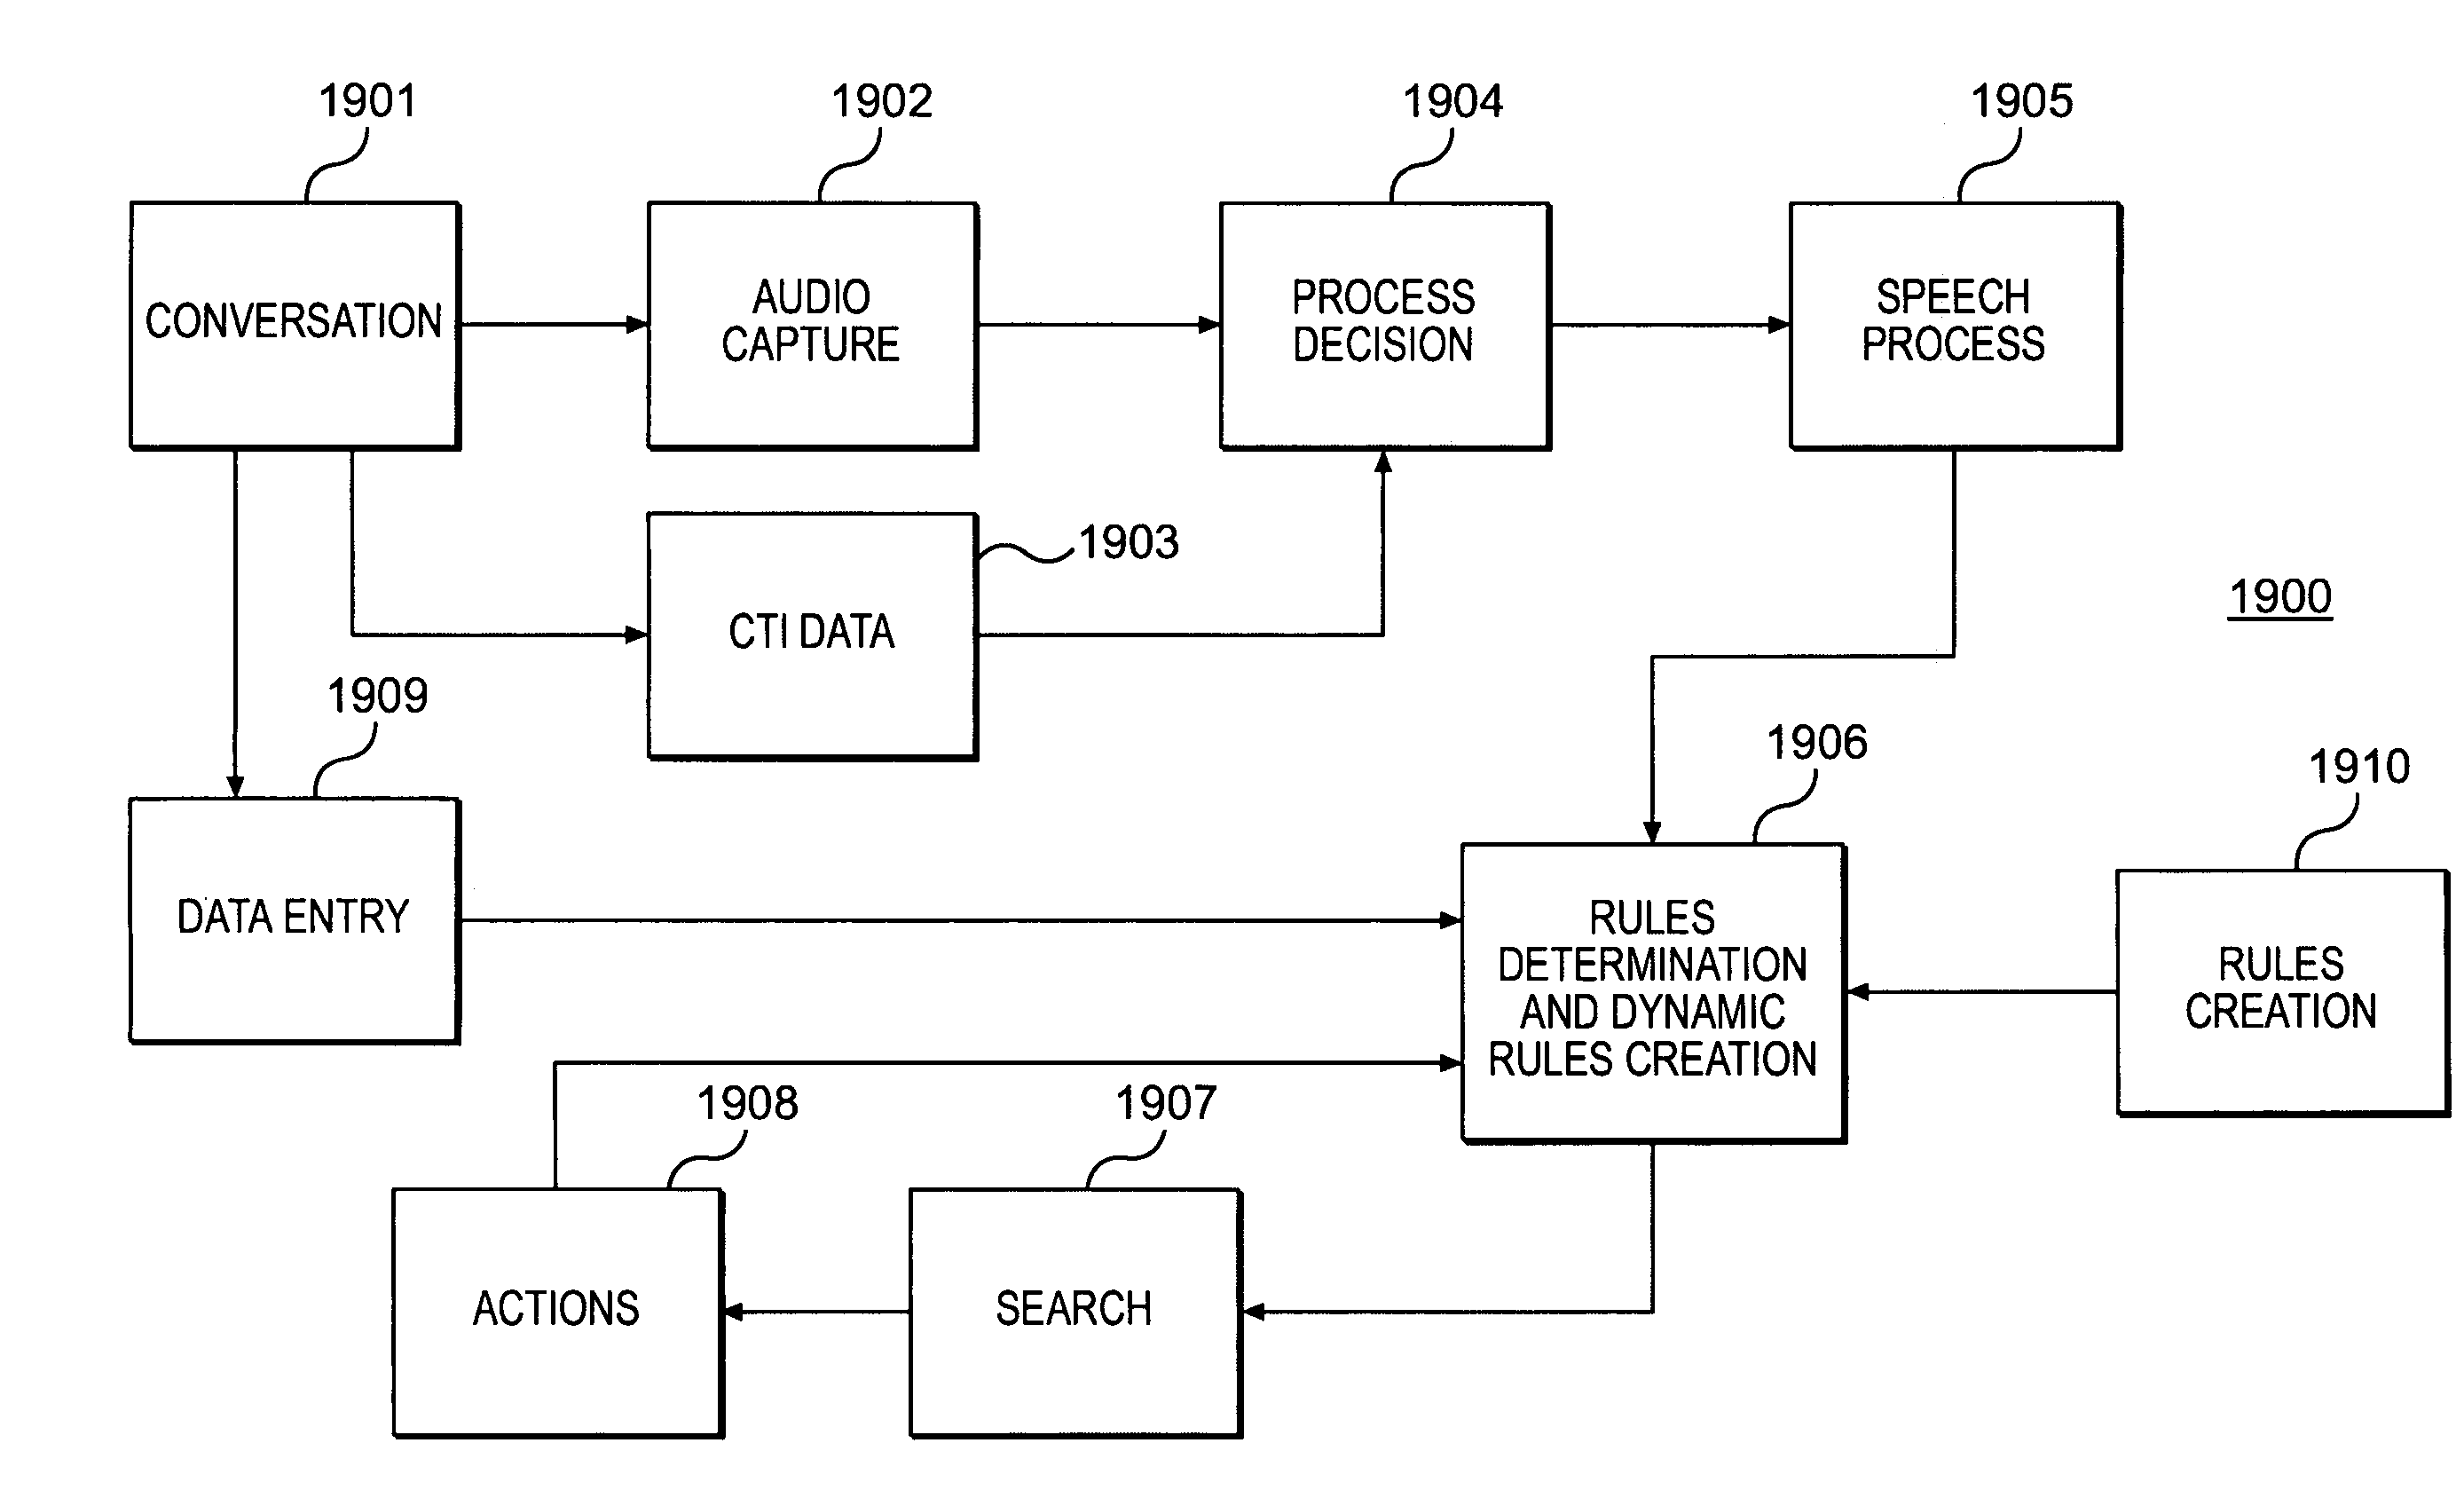 Methods and apparatus for audio data monitoring and evaluation using speech recognition